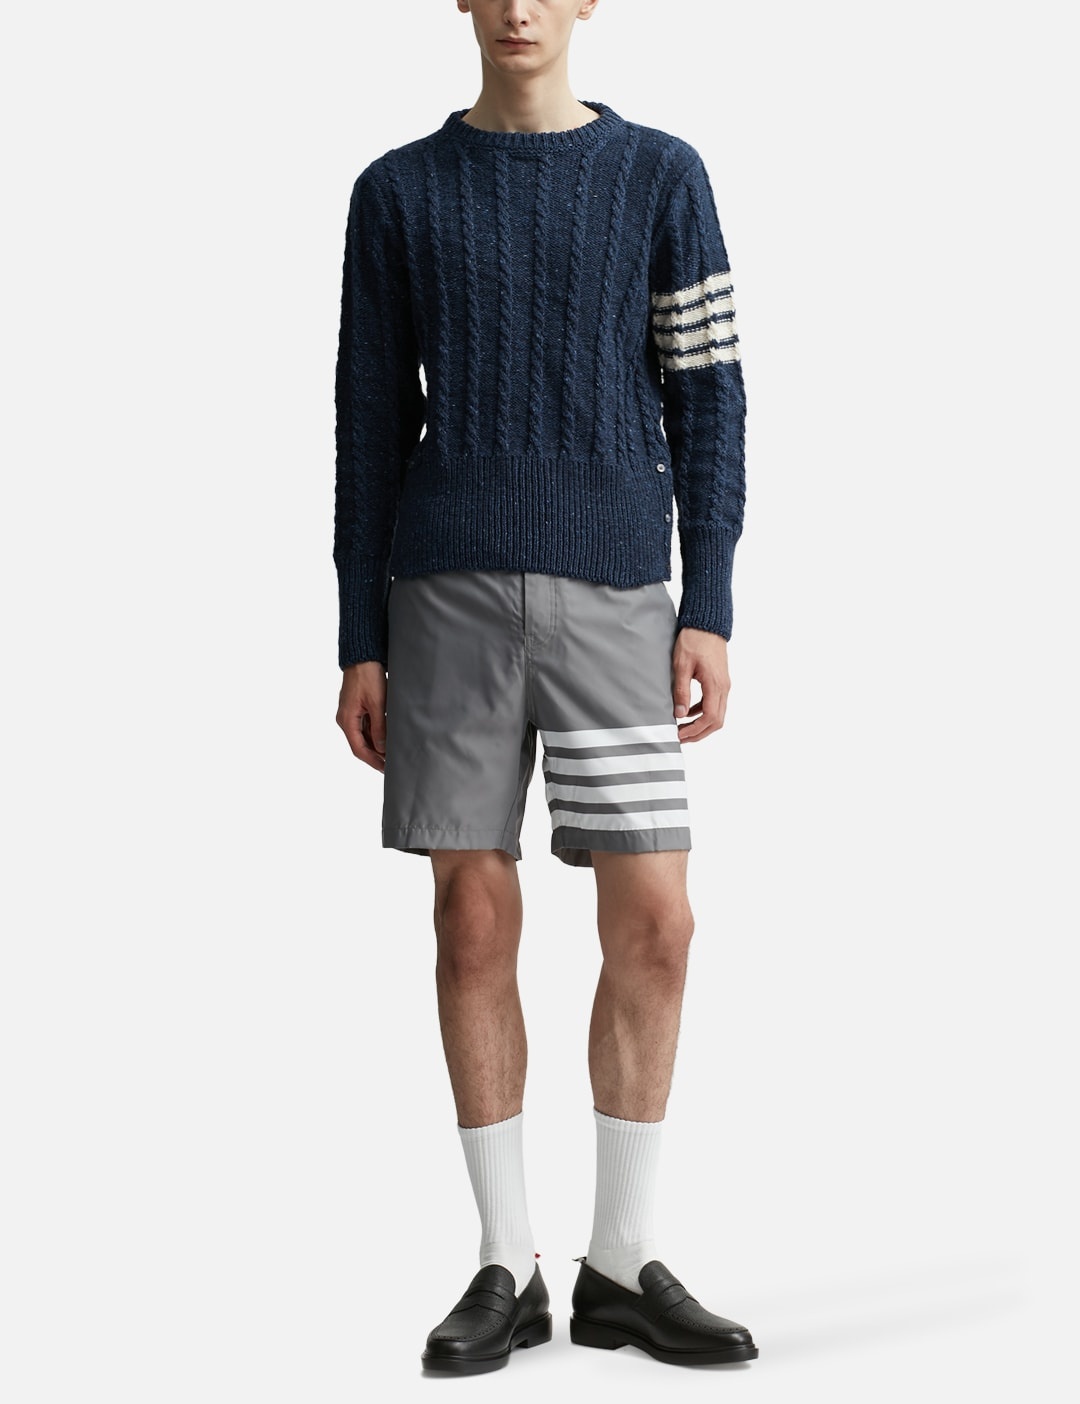 Thom Browne Donegal Twist Cable 4-Bar Classic Crew Neck Pullover